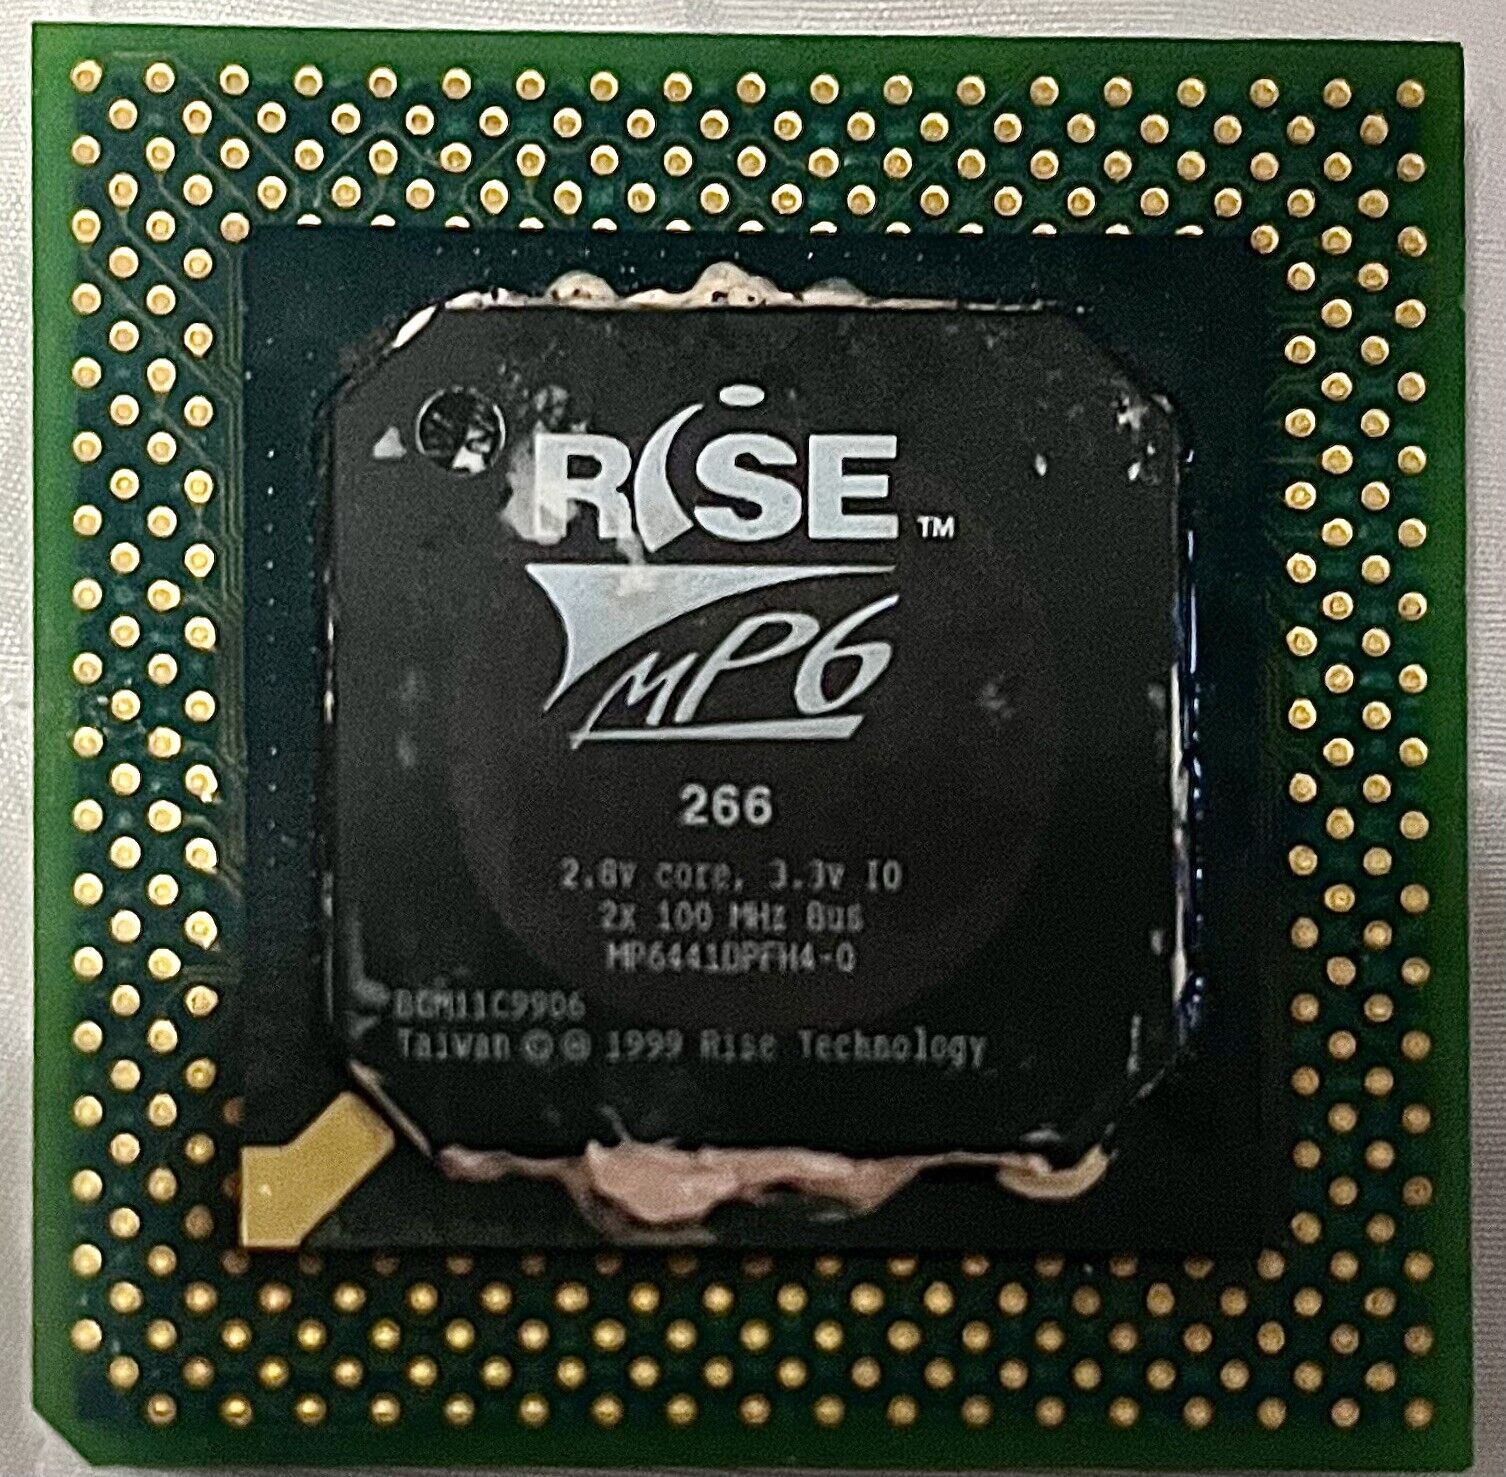 Rise MP6 266 Mhz CPU Socket 7 PC Processor Rare 2x 100mhz Bus Tested